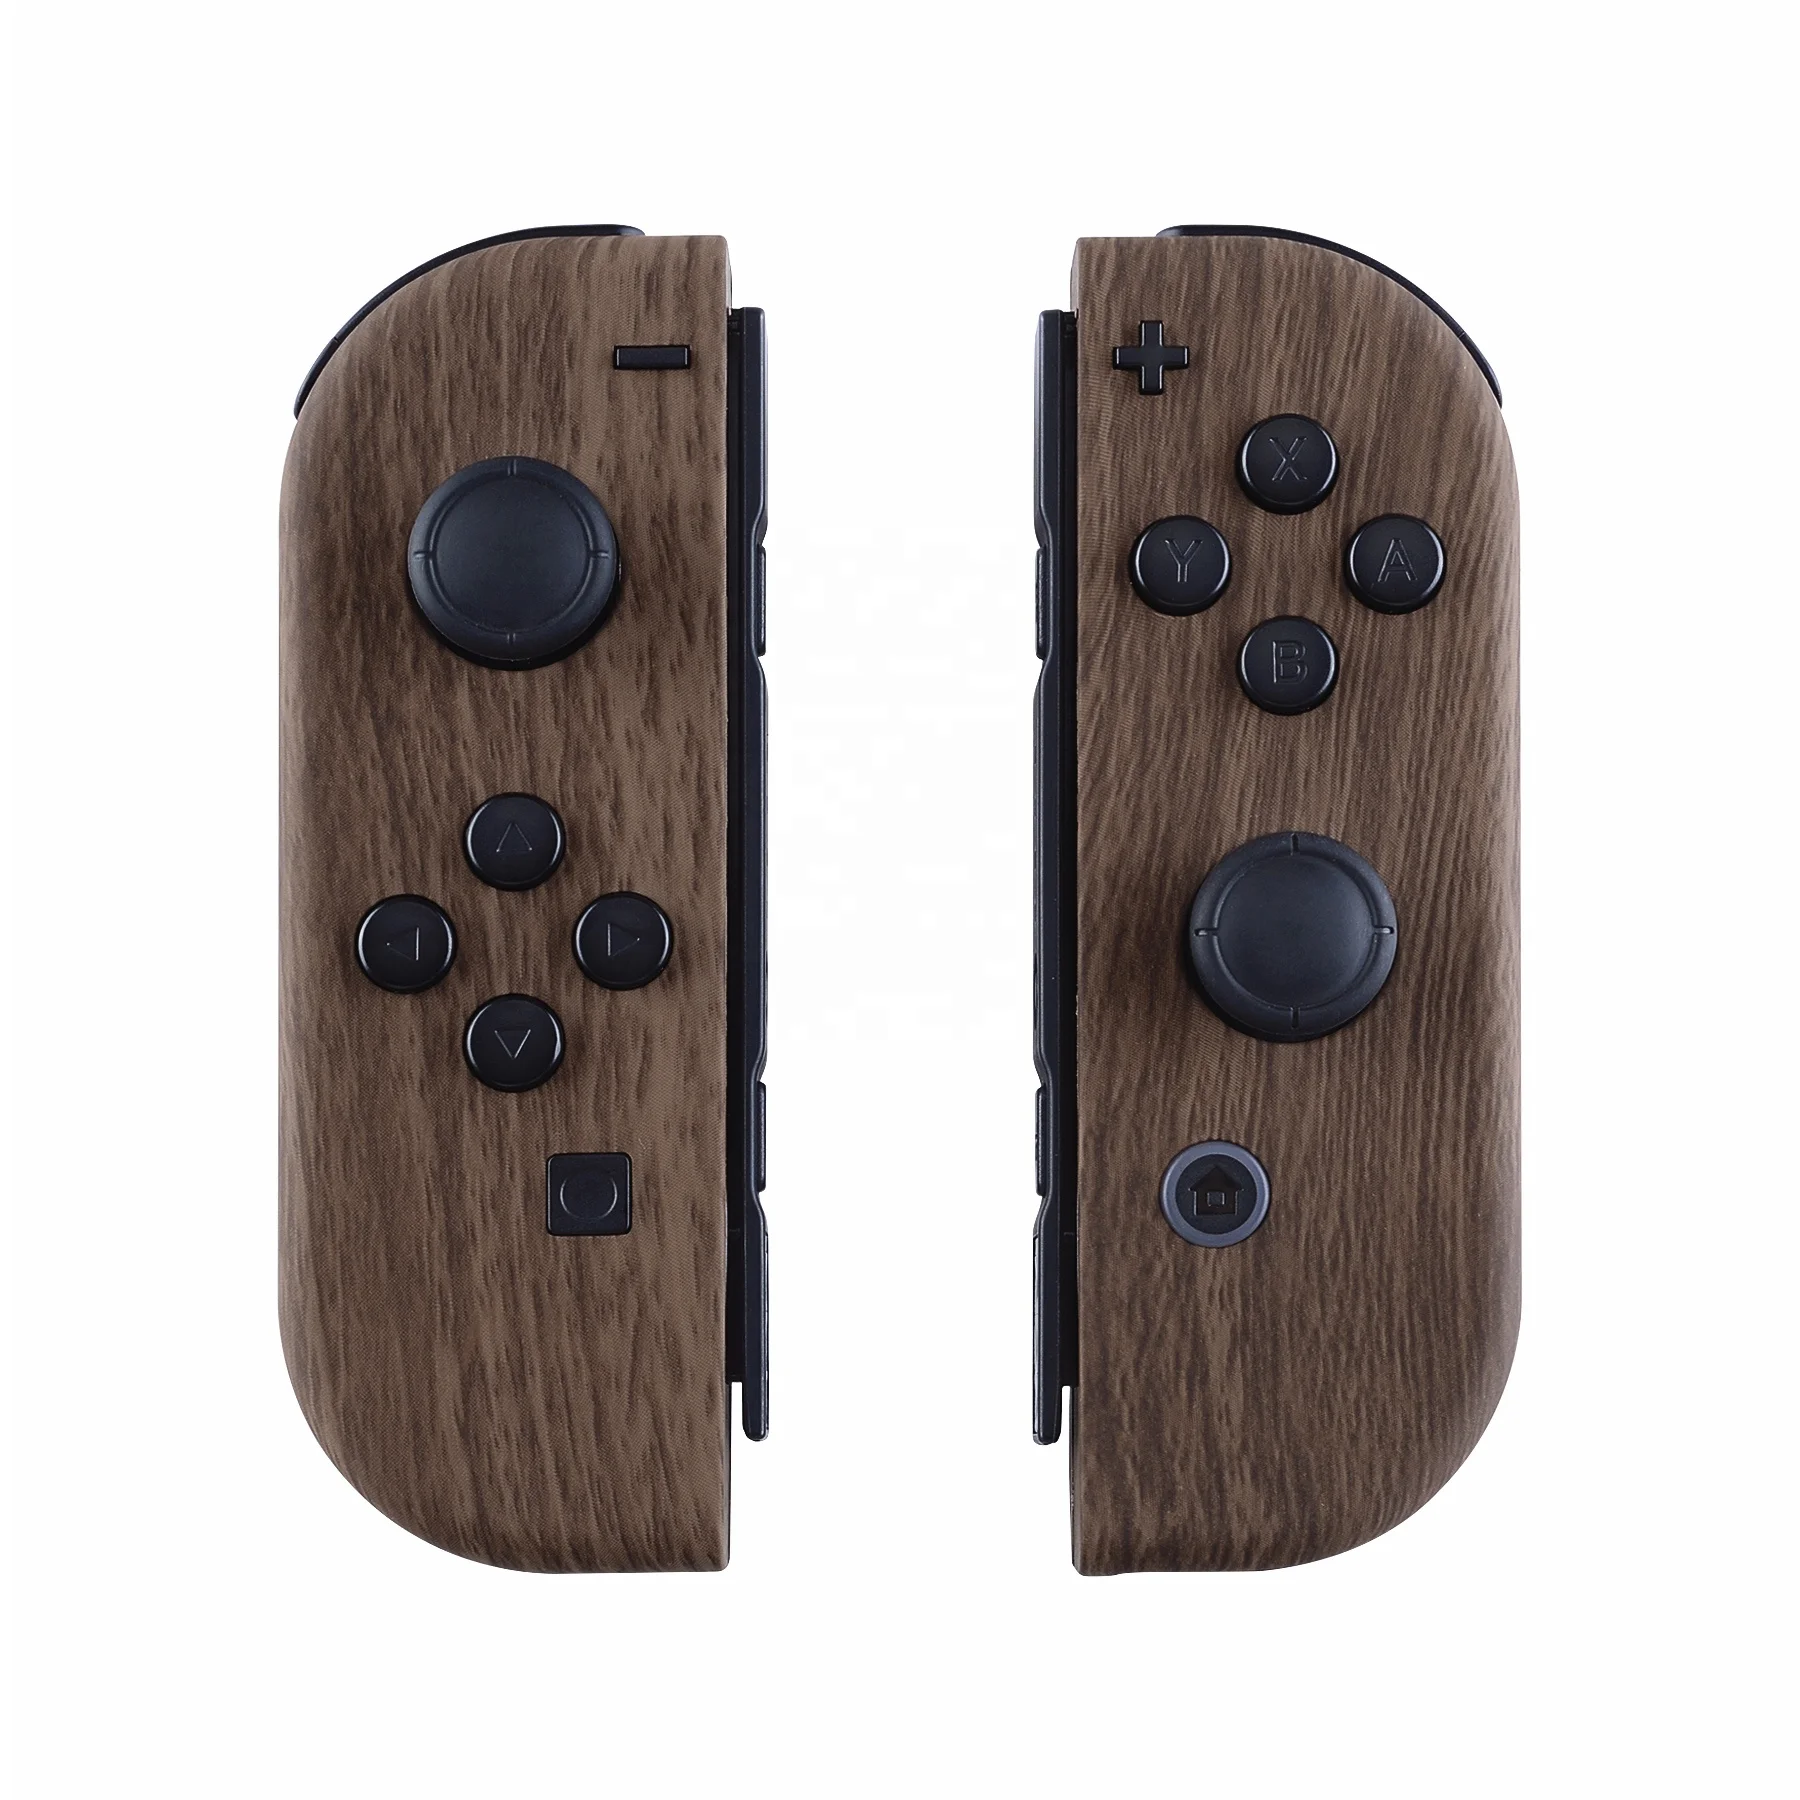 

Gamepad Accessories Wooden Grain Custom Case Switch Controller Cover Housing Shell For Nintendo Switch Joycon For NS OLED